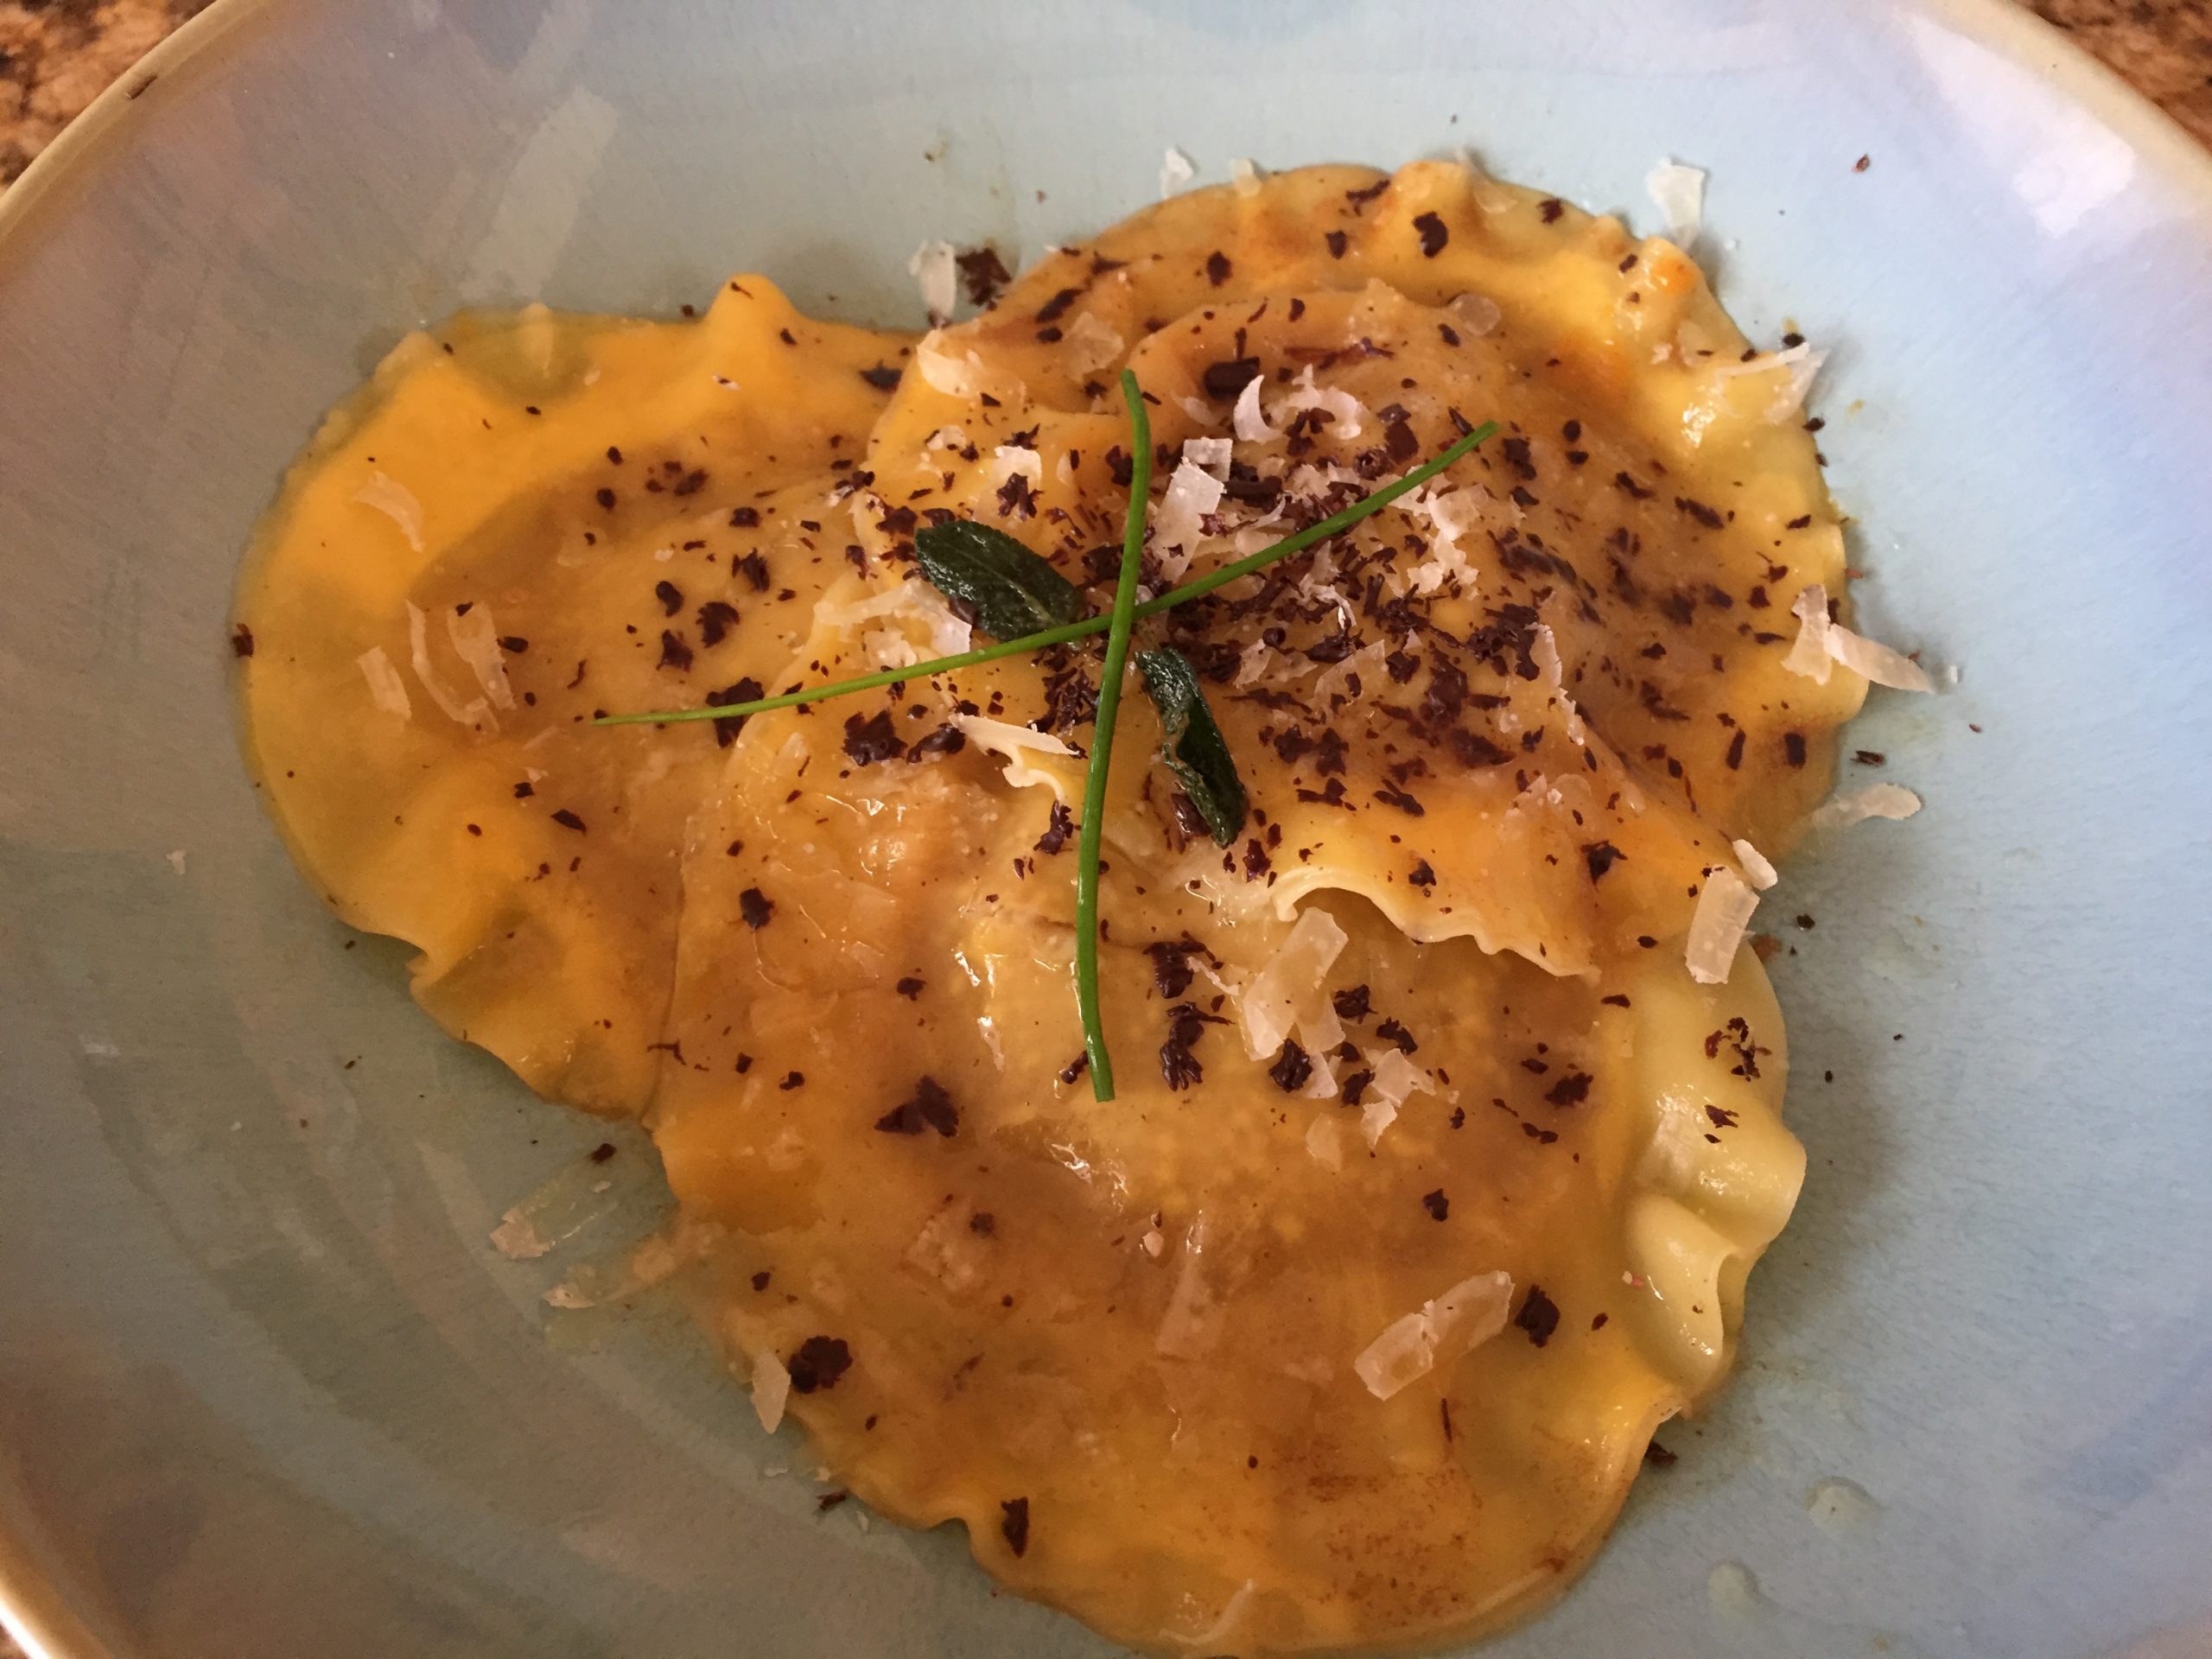 Butternut squash with sage brown butter